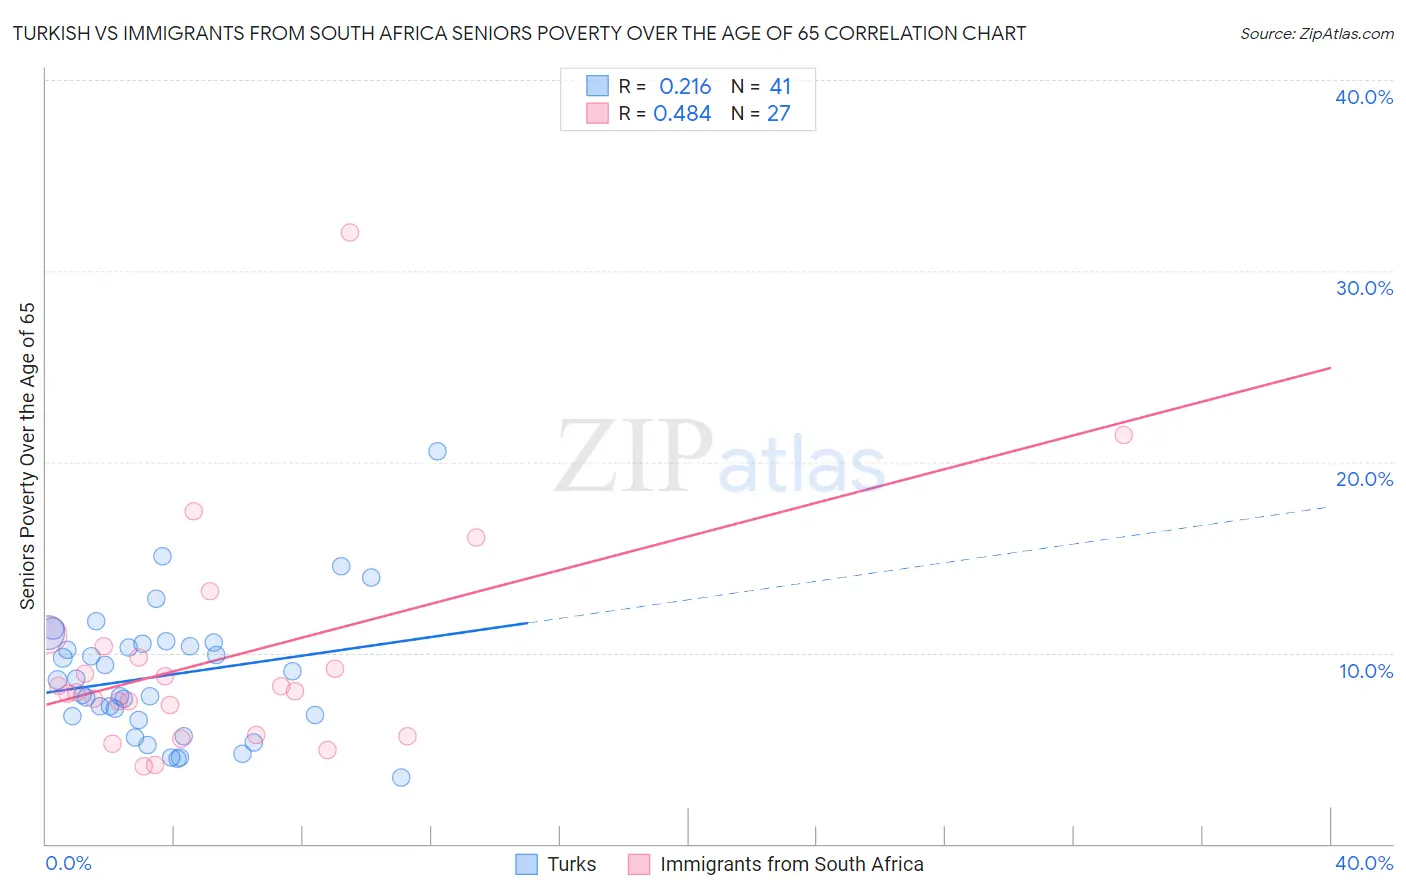 Turkish vs Immigrants from South Africa Seniors Poverty Over the Age of 65